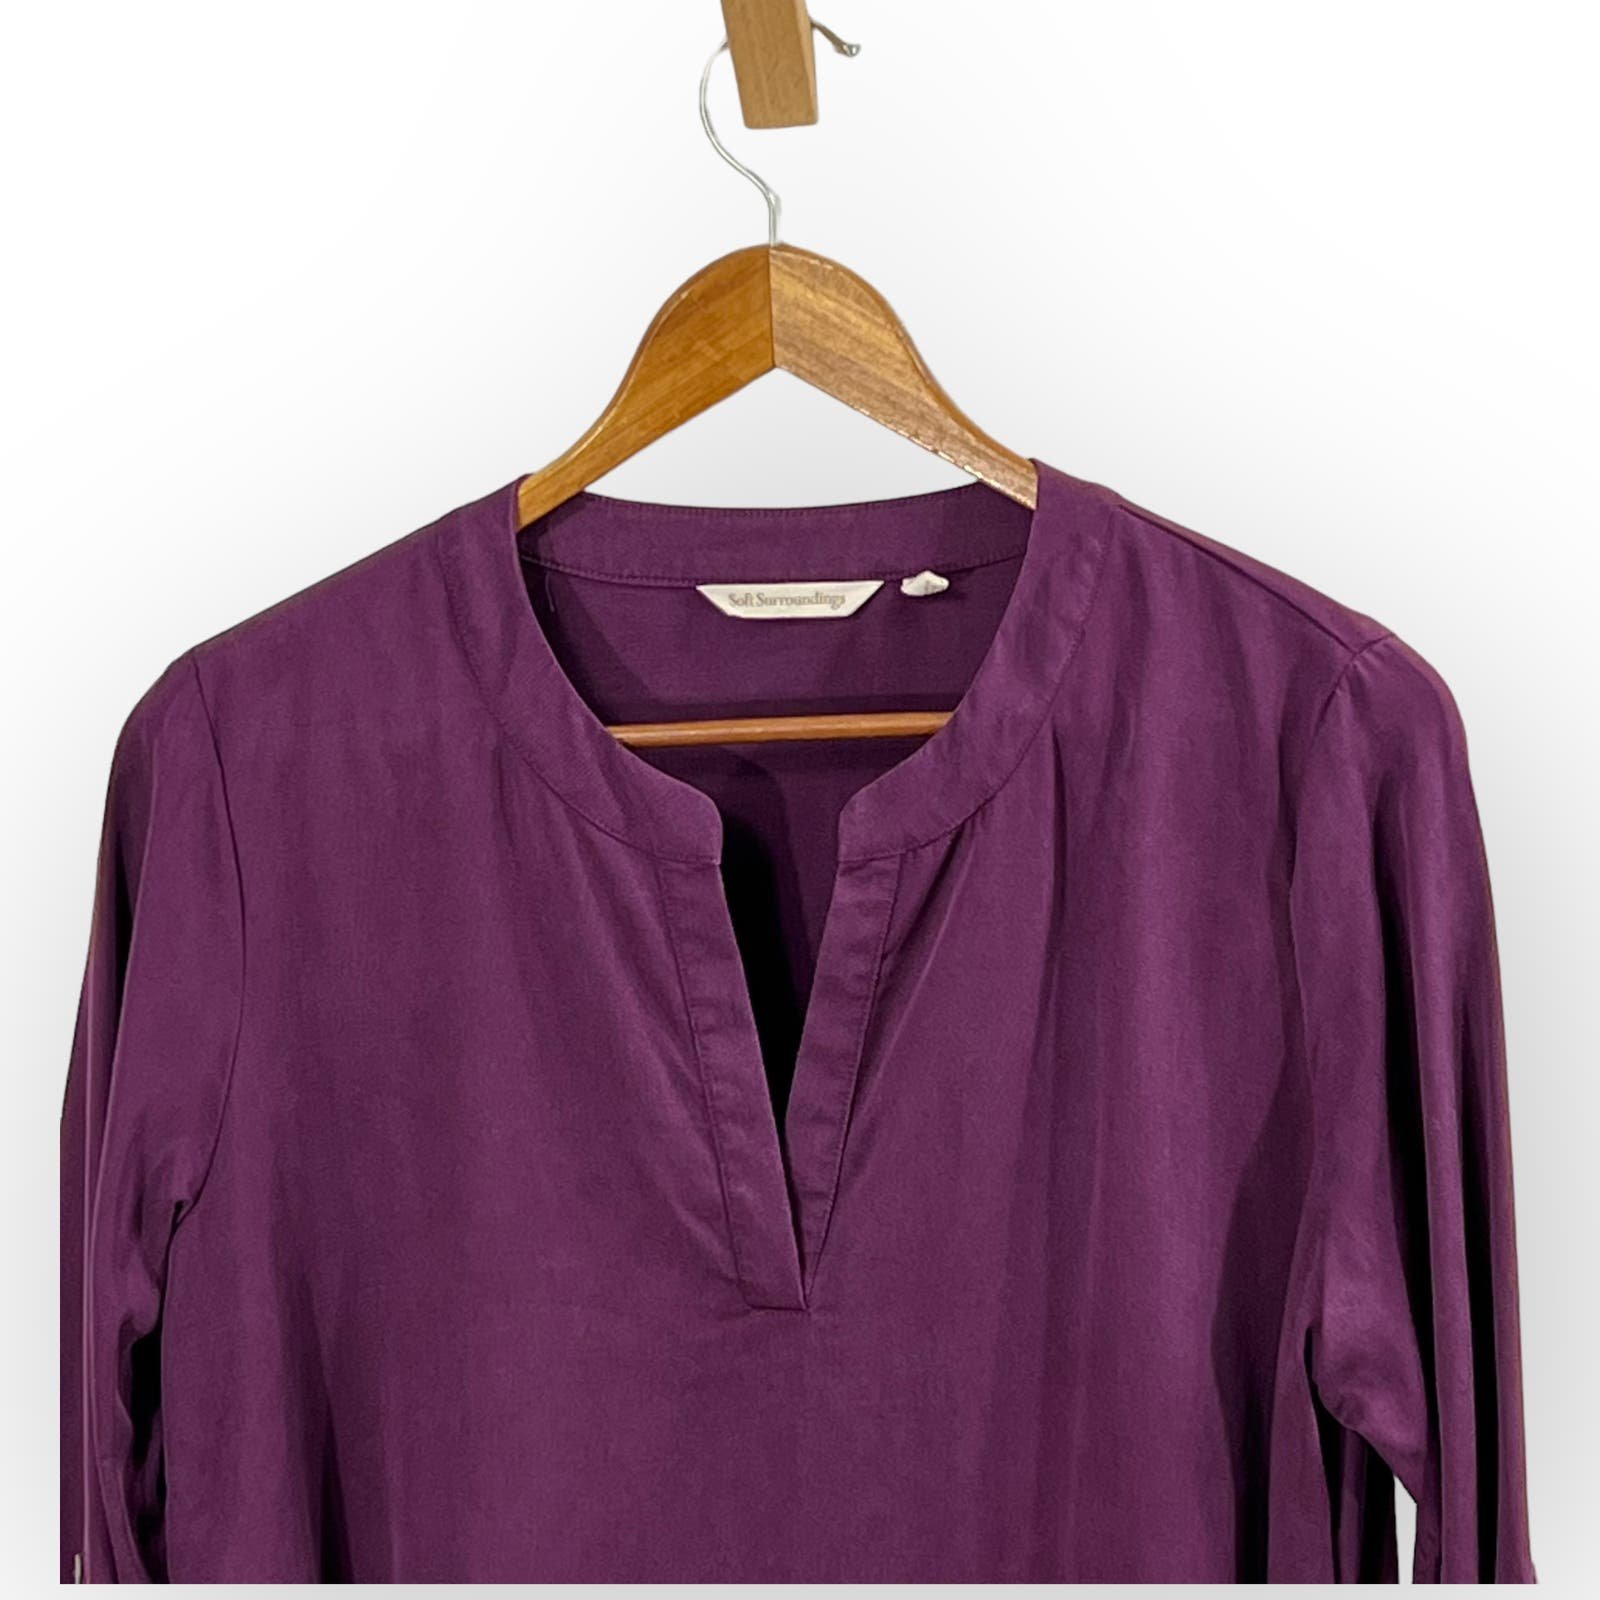 where to buy  Soft Surroundings Tunic Top Size Medium Purple Woven Tencel Roll Tab V-Neck LsQUBFHGZ US Outlet